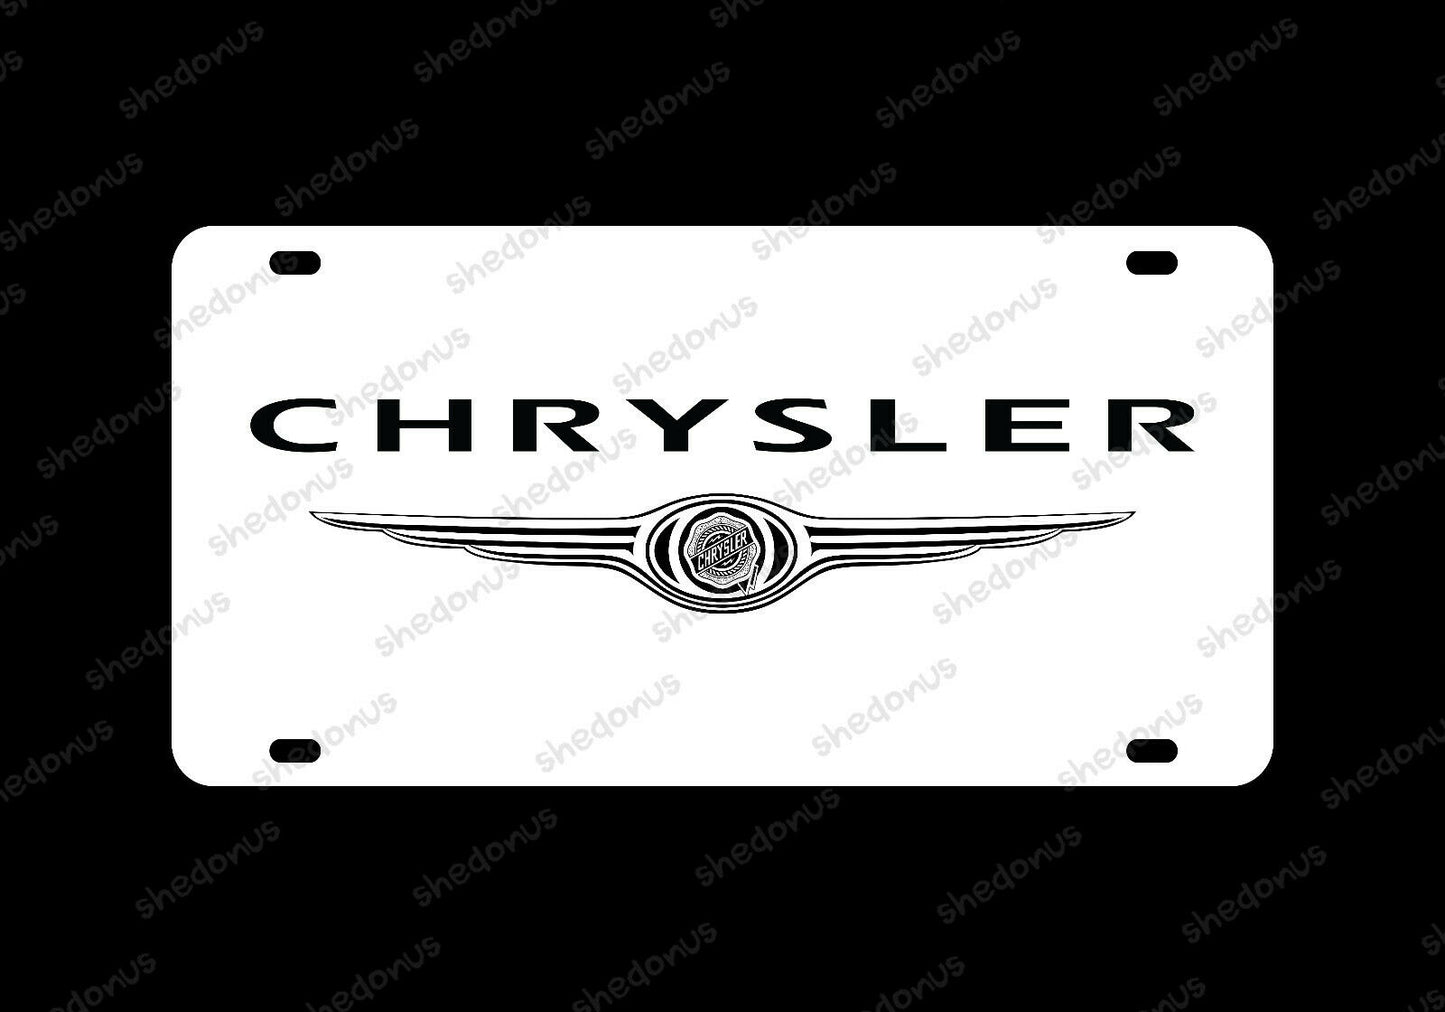 Chrysler License Plate Acrylic Vanity Car Tag 300 White Cruiser Country